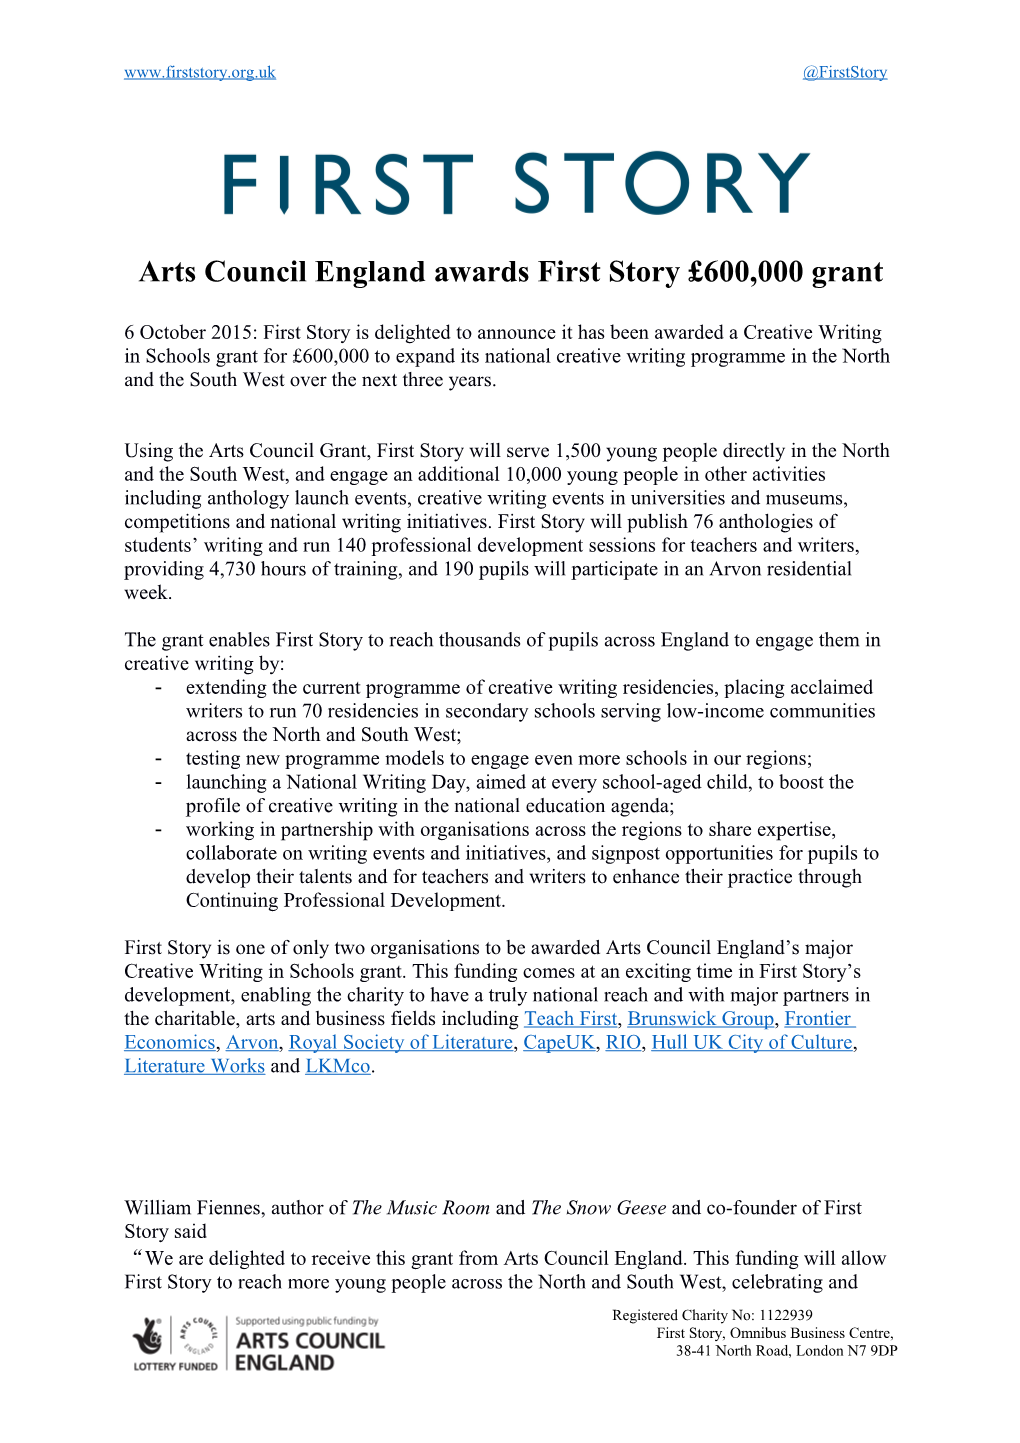 Arts Council England Awards First Story 600,000 Grant